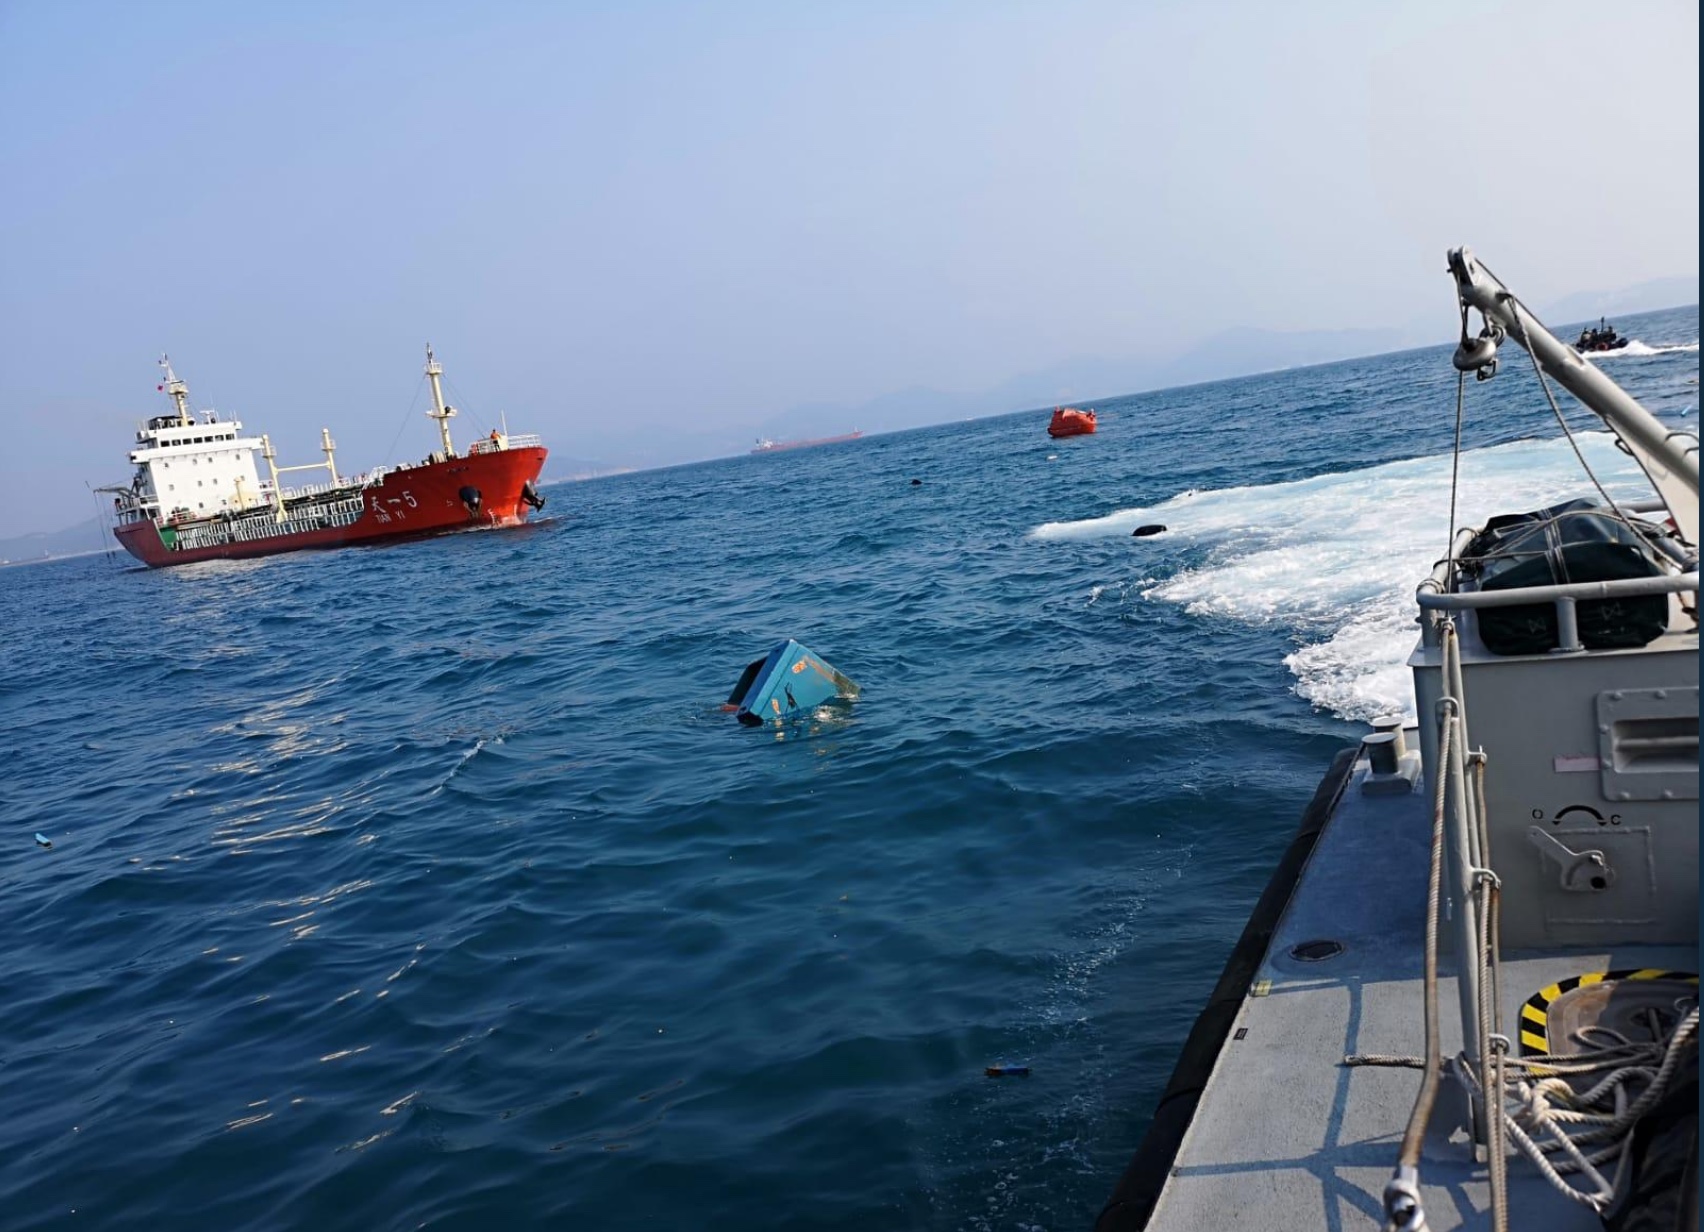 A view of the scene of a collision between an oil tanker and a fishing vessel near Lamma Island today. Photo via HK Police Force.